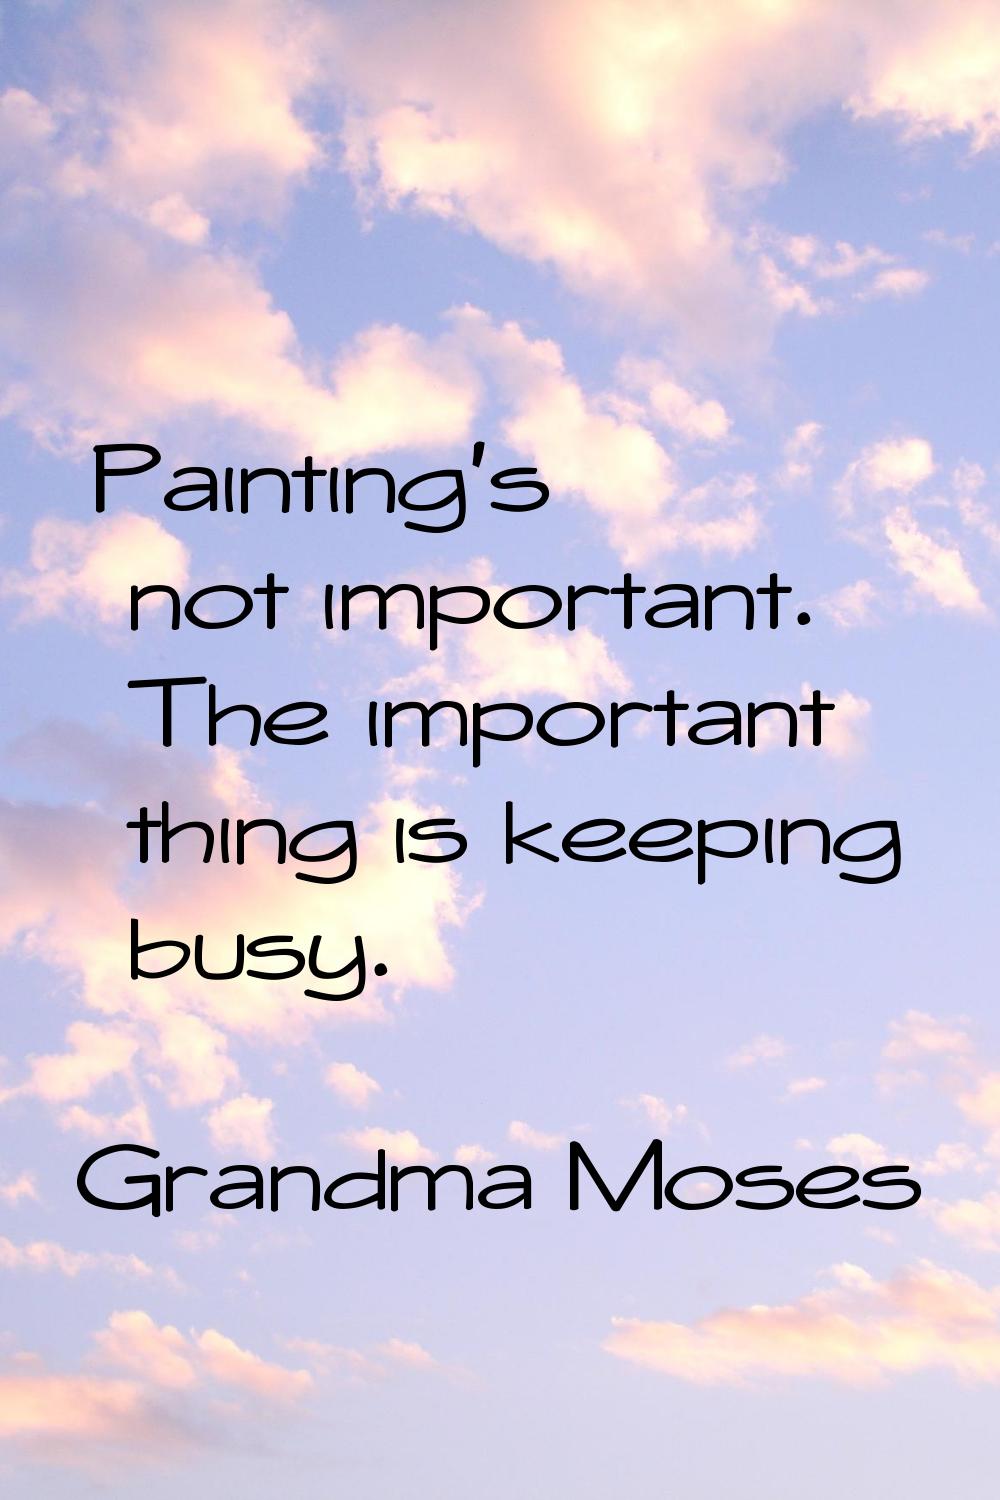 Painting's not important. The important thing is keeping busy.